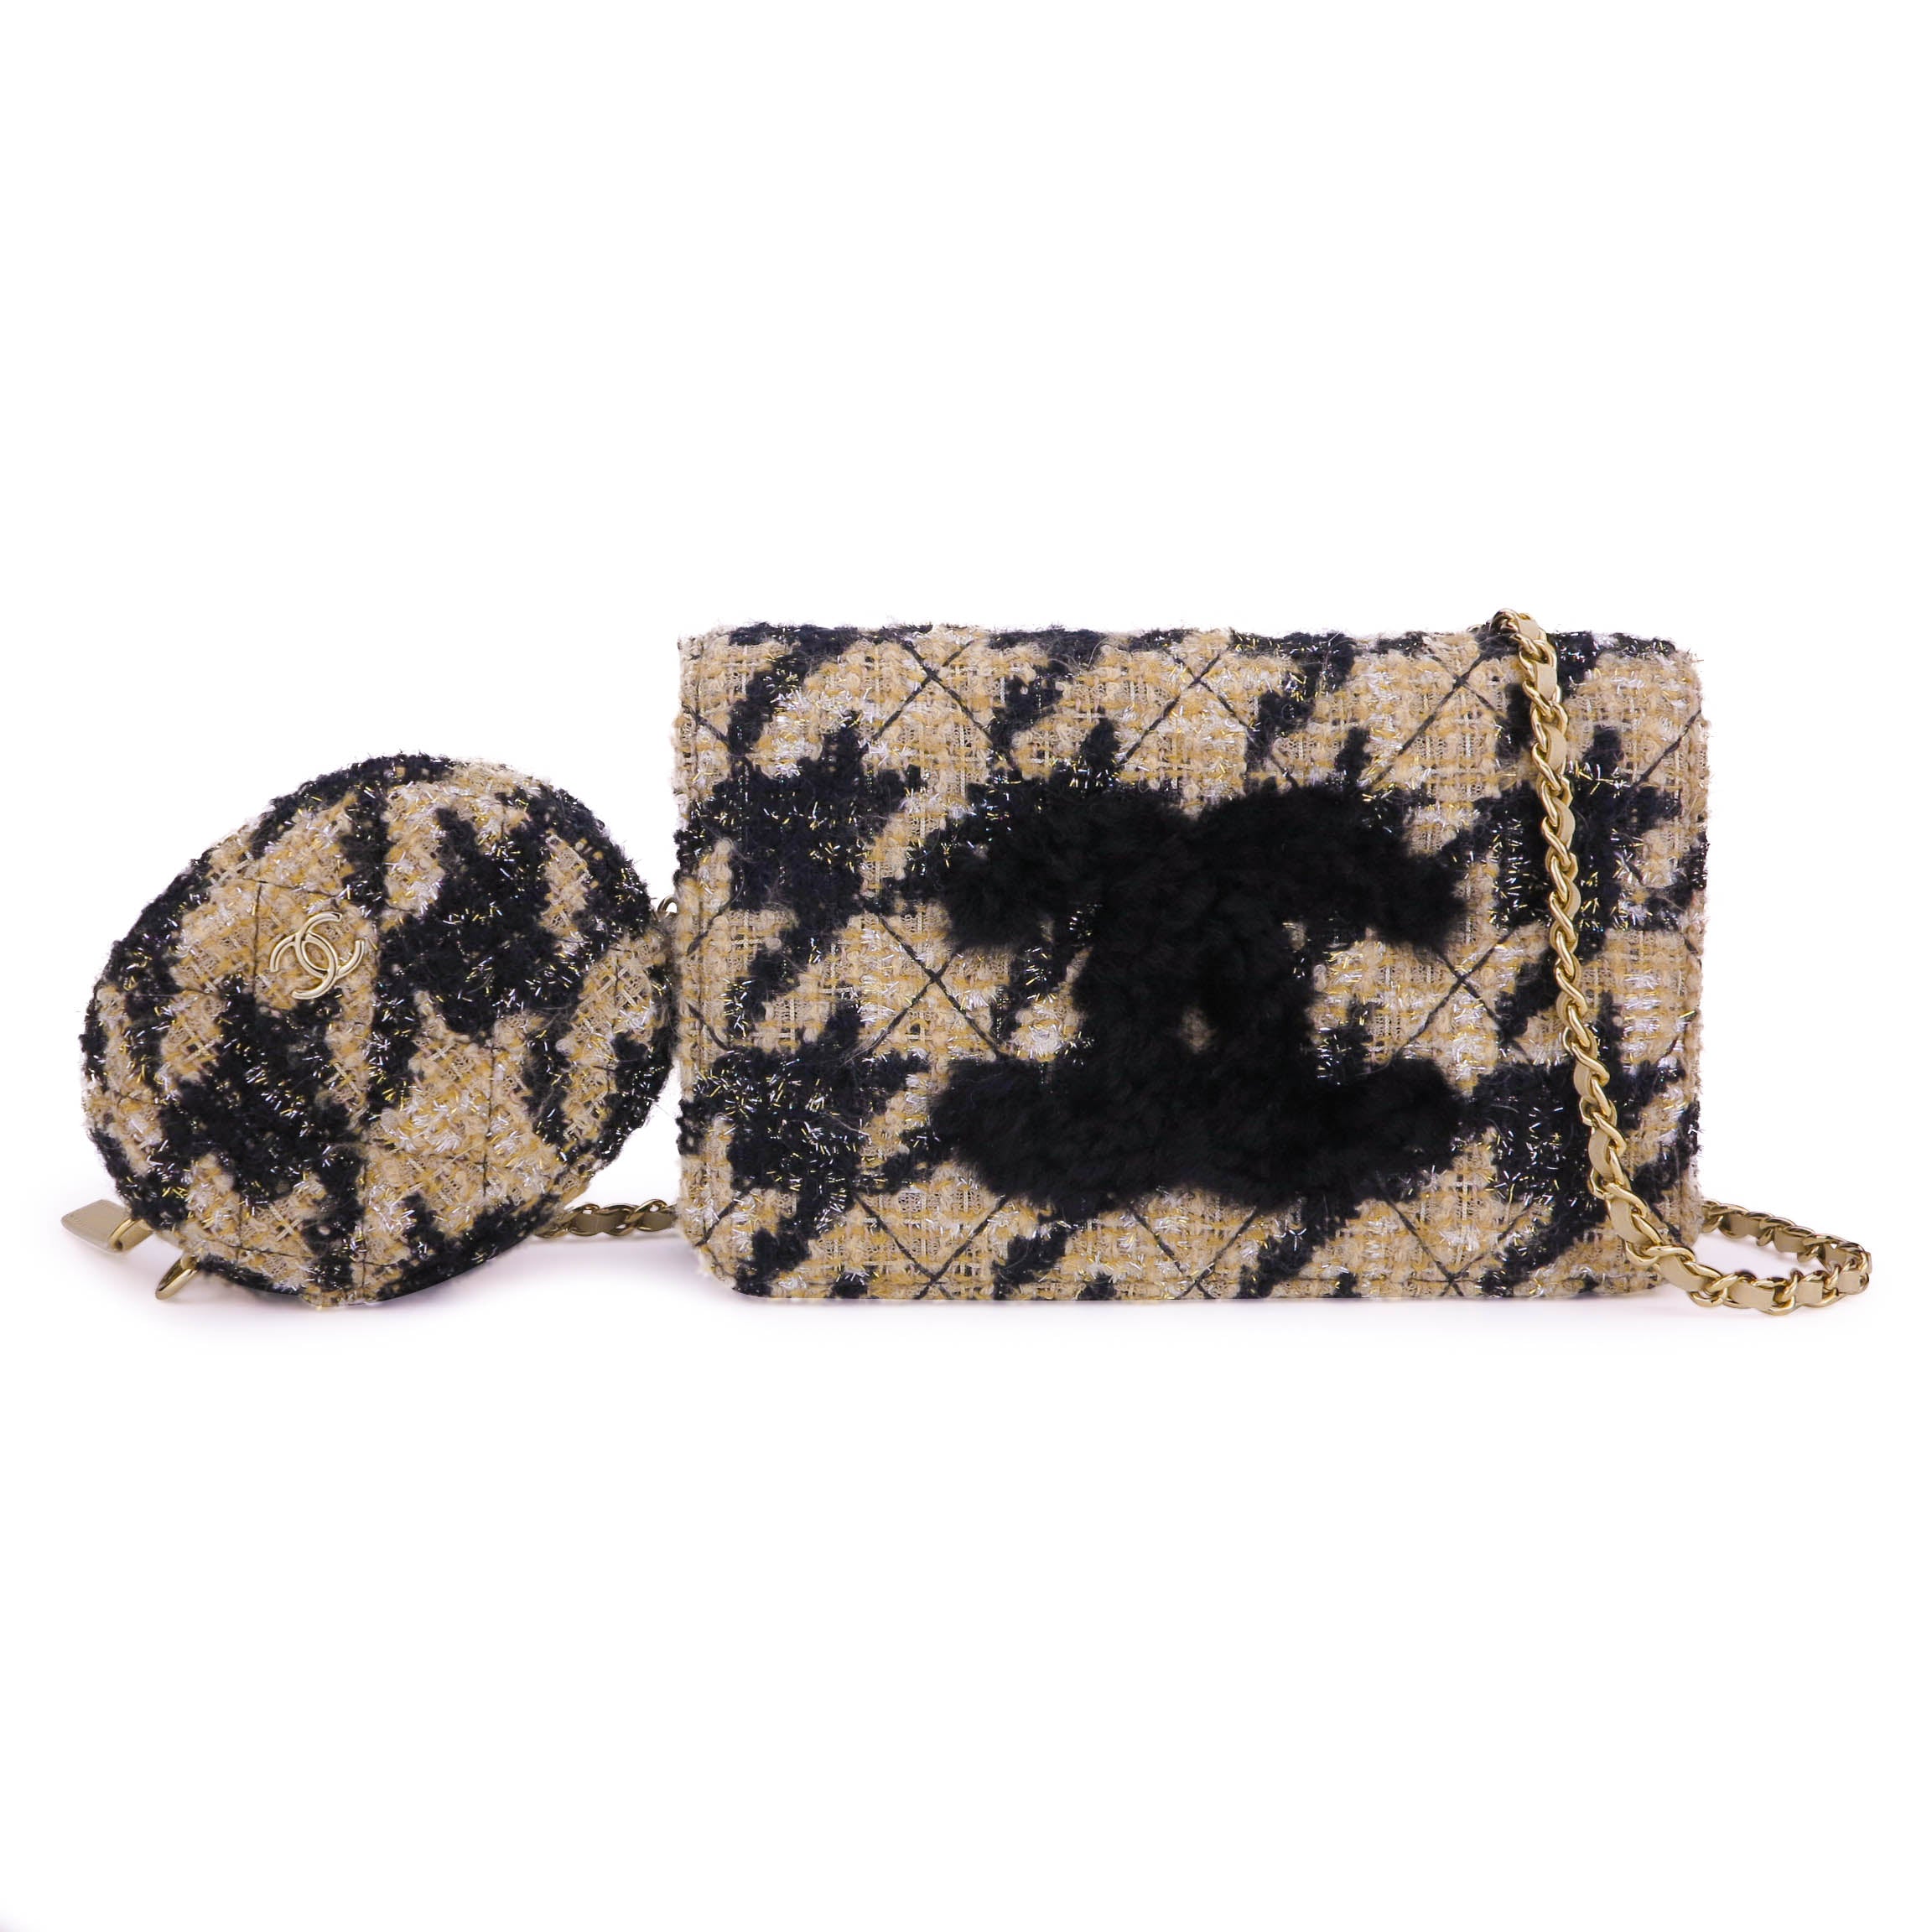 Chanel - Chanel 19 WOC with Coin Purse - Green Tweed